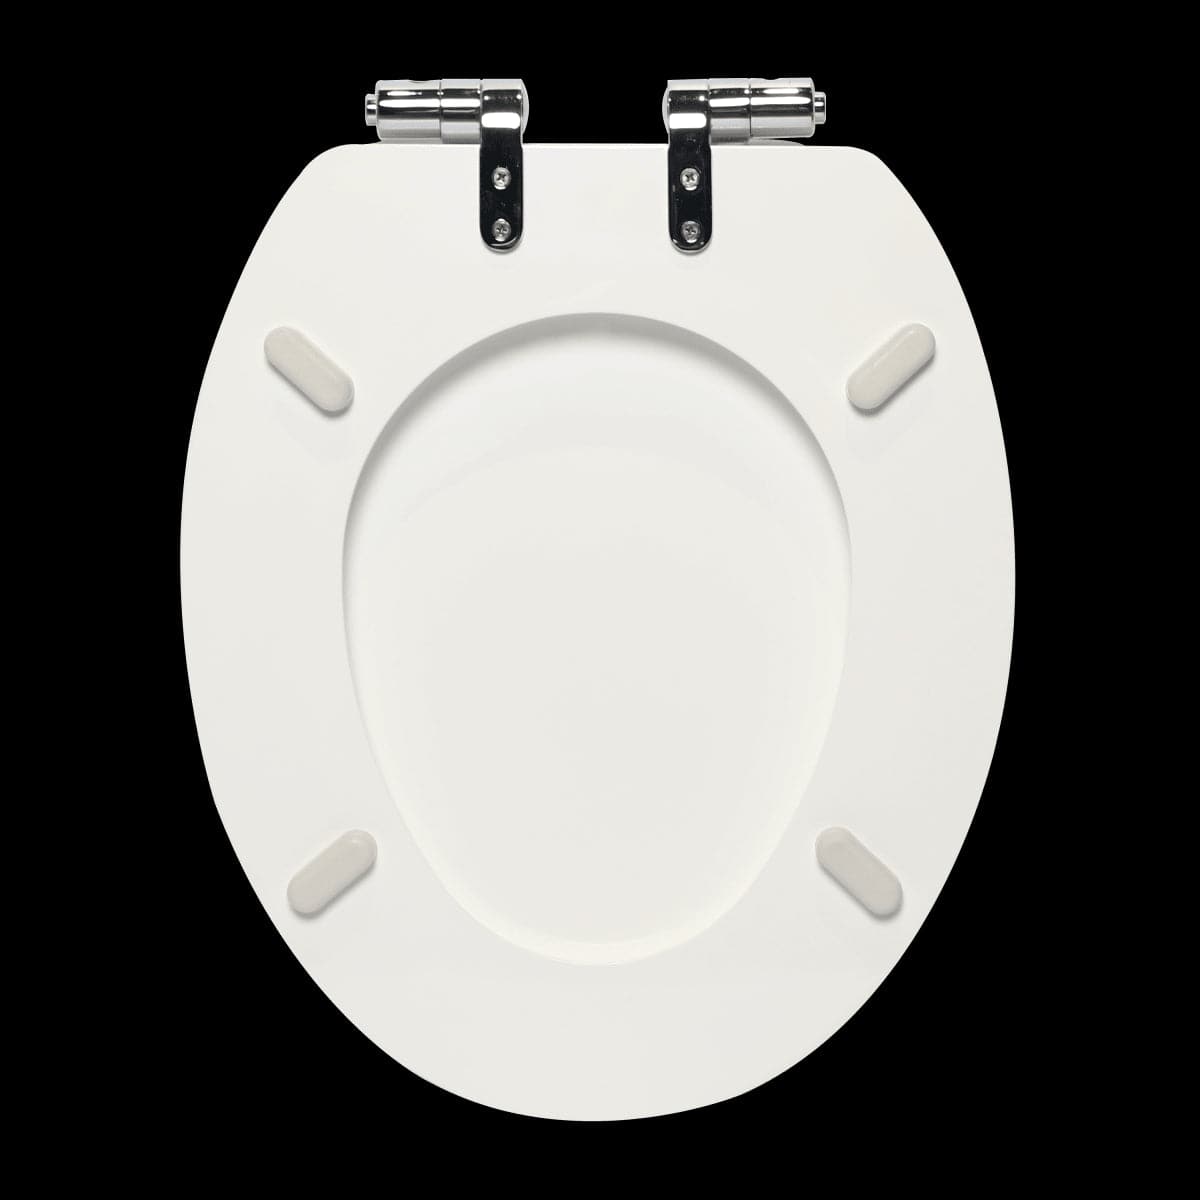 PURITY OVAL WHITE WC SEAT WITH SLOW CLOSING MECHANISM - best price from Maltashopper.com BR430007086